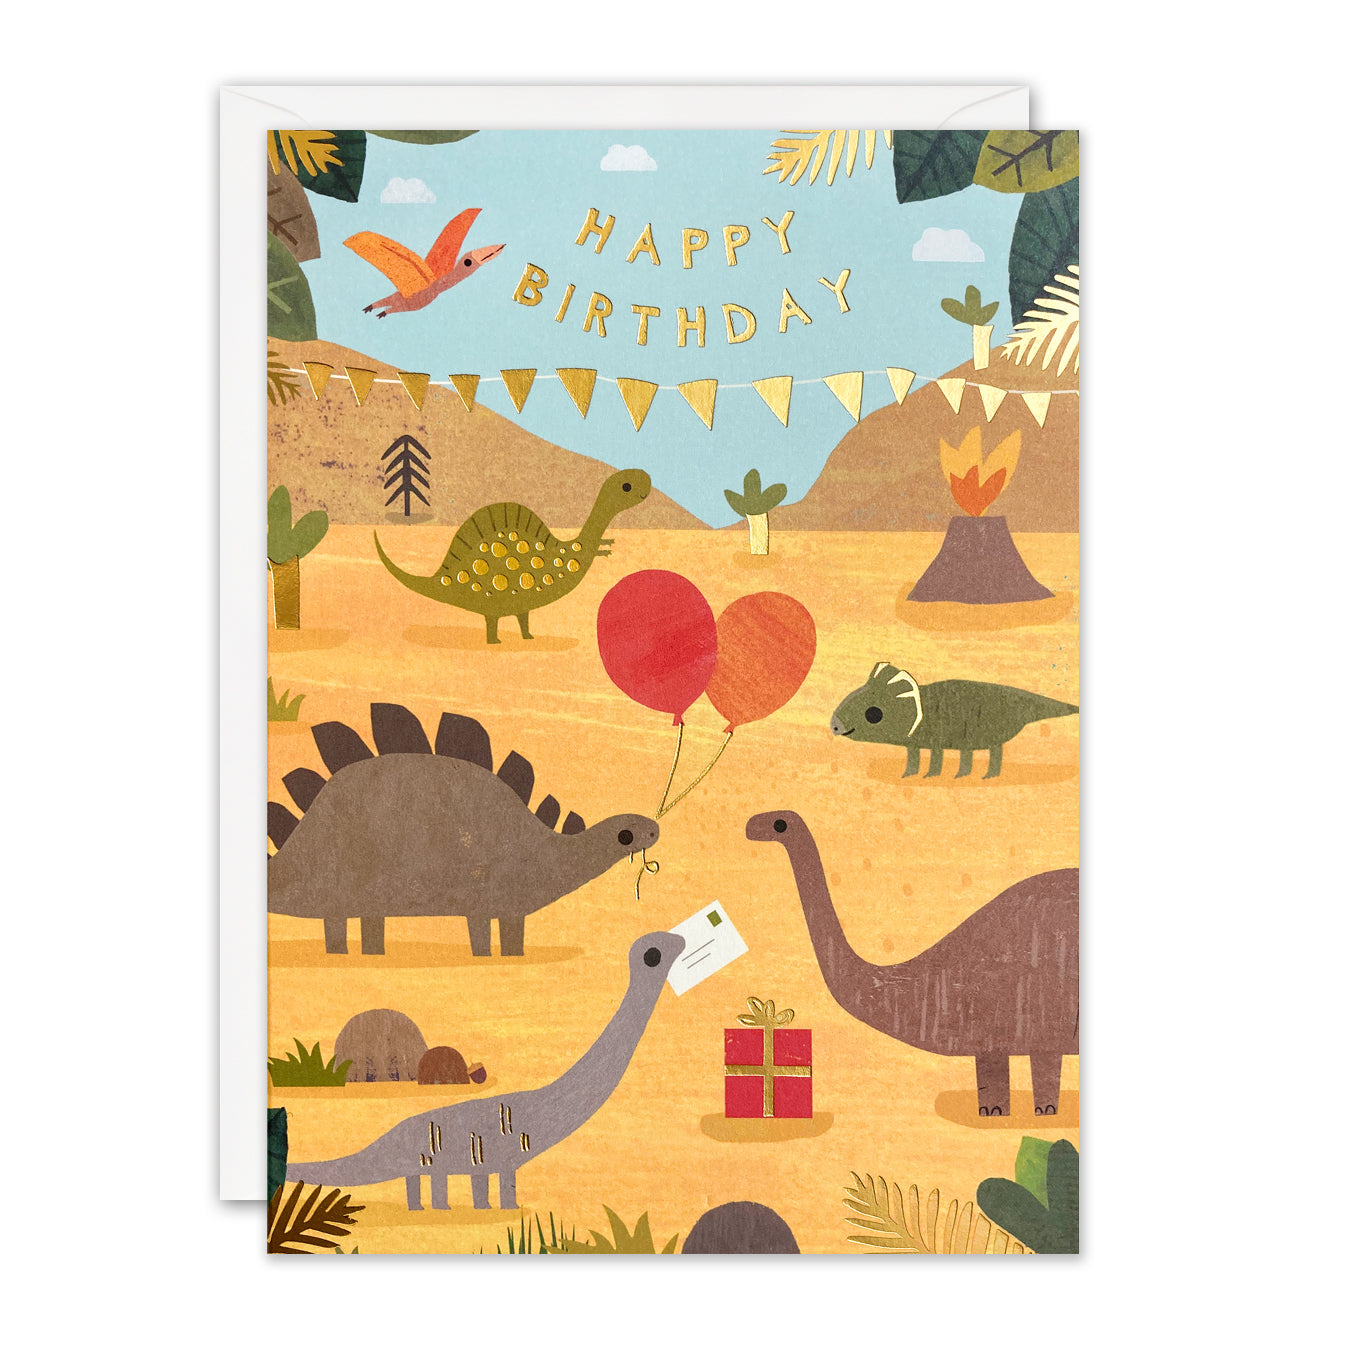 Jurassic Party Children's Birthday Card from Penny Black